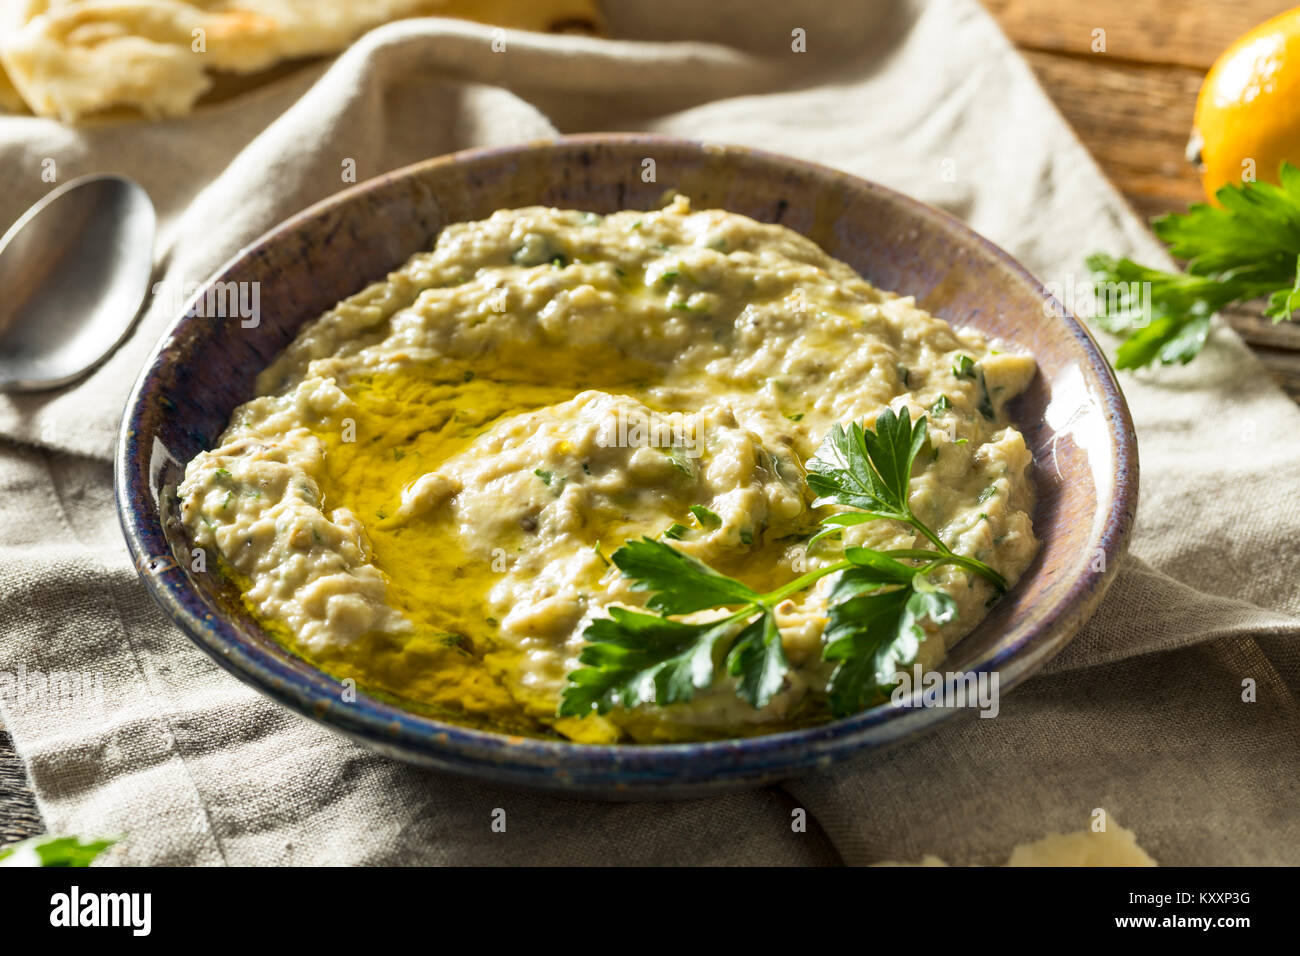 Savory Homemade Mediterranean Baba Ganoush with Olive OIl and Parsley Stock Photo